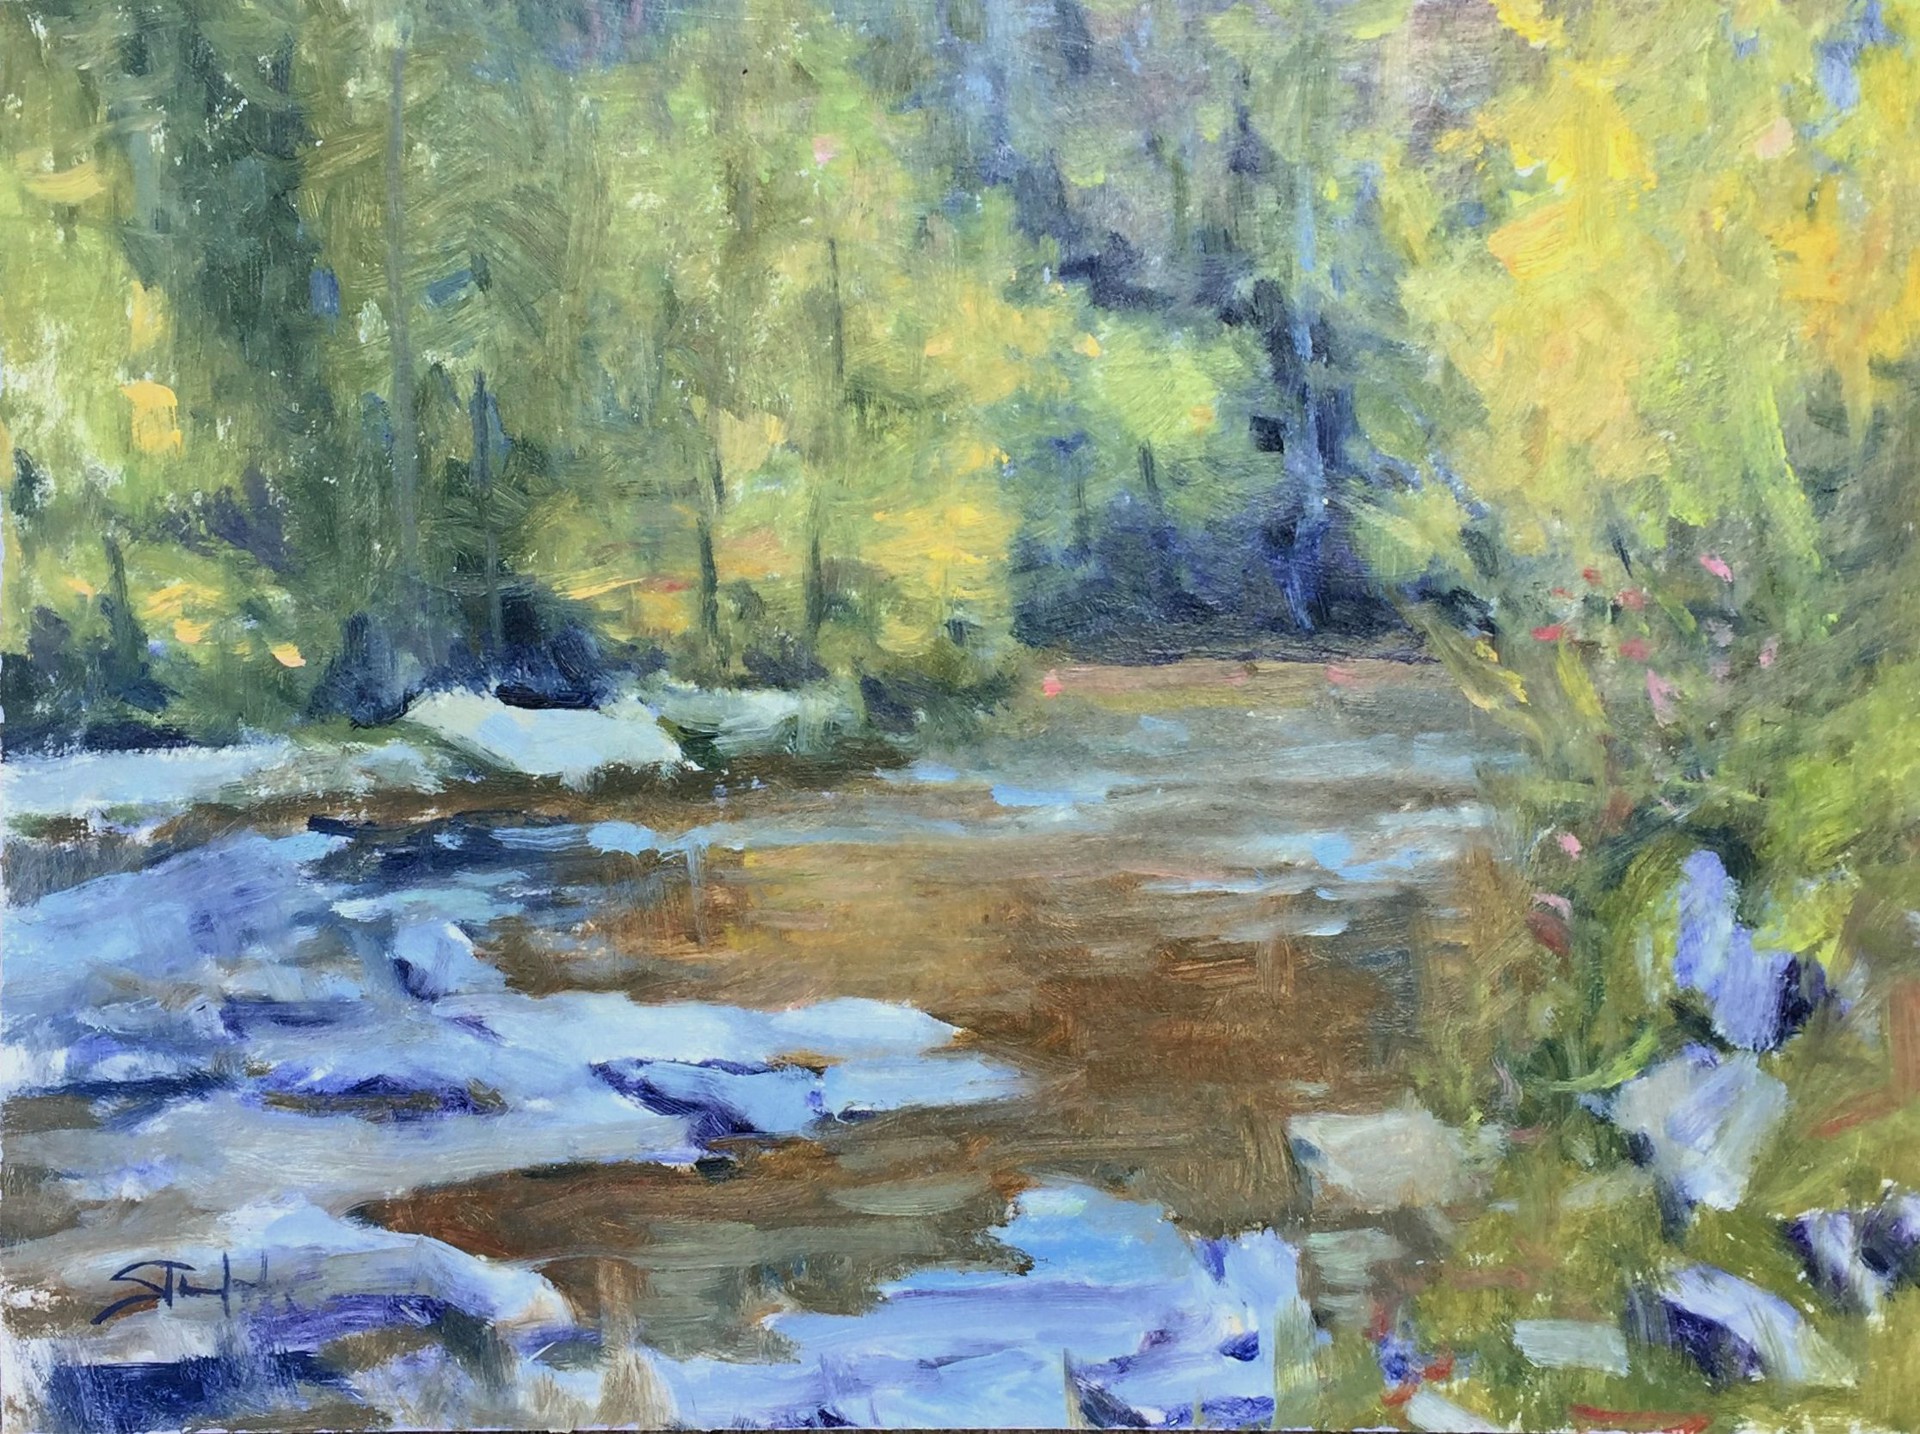 Toccoa River Fall by John Stanford